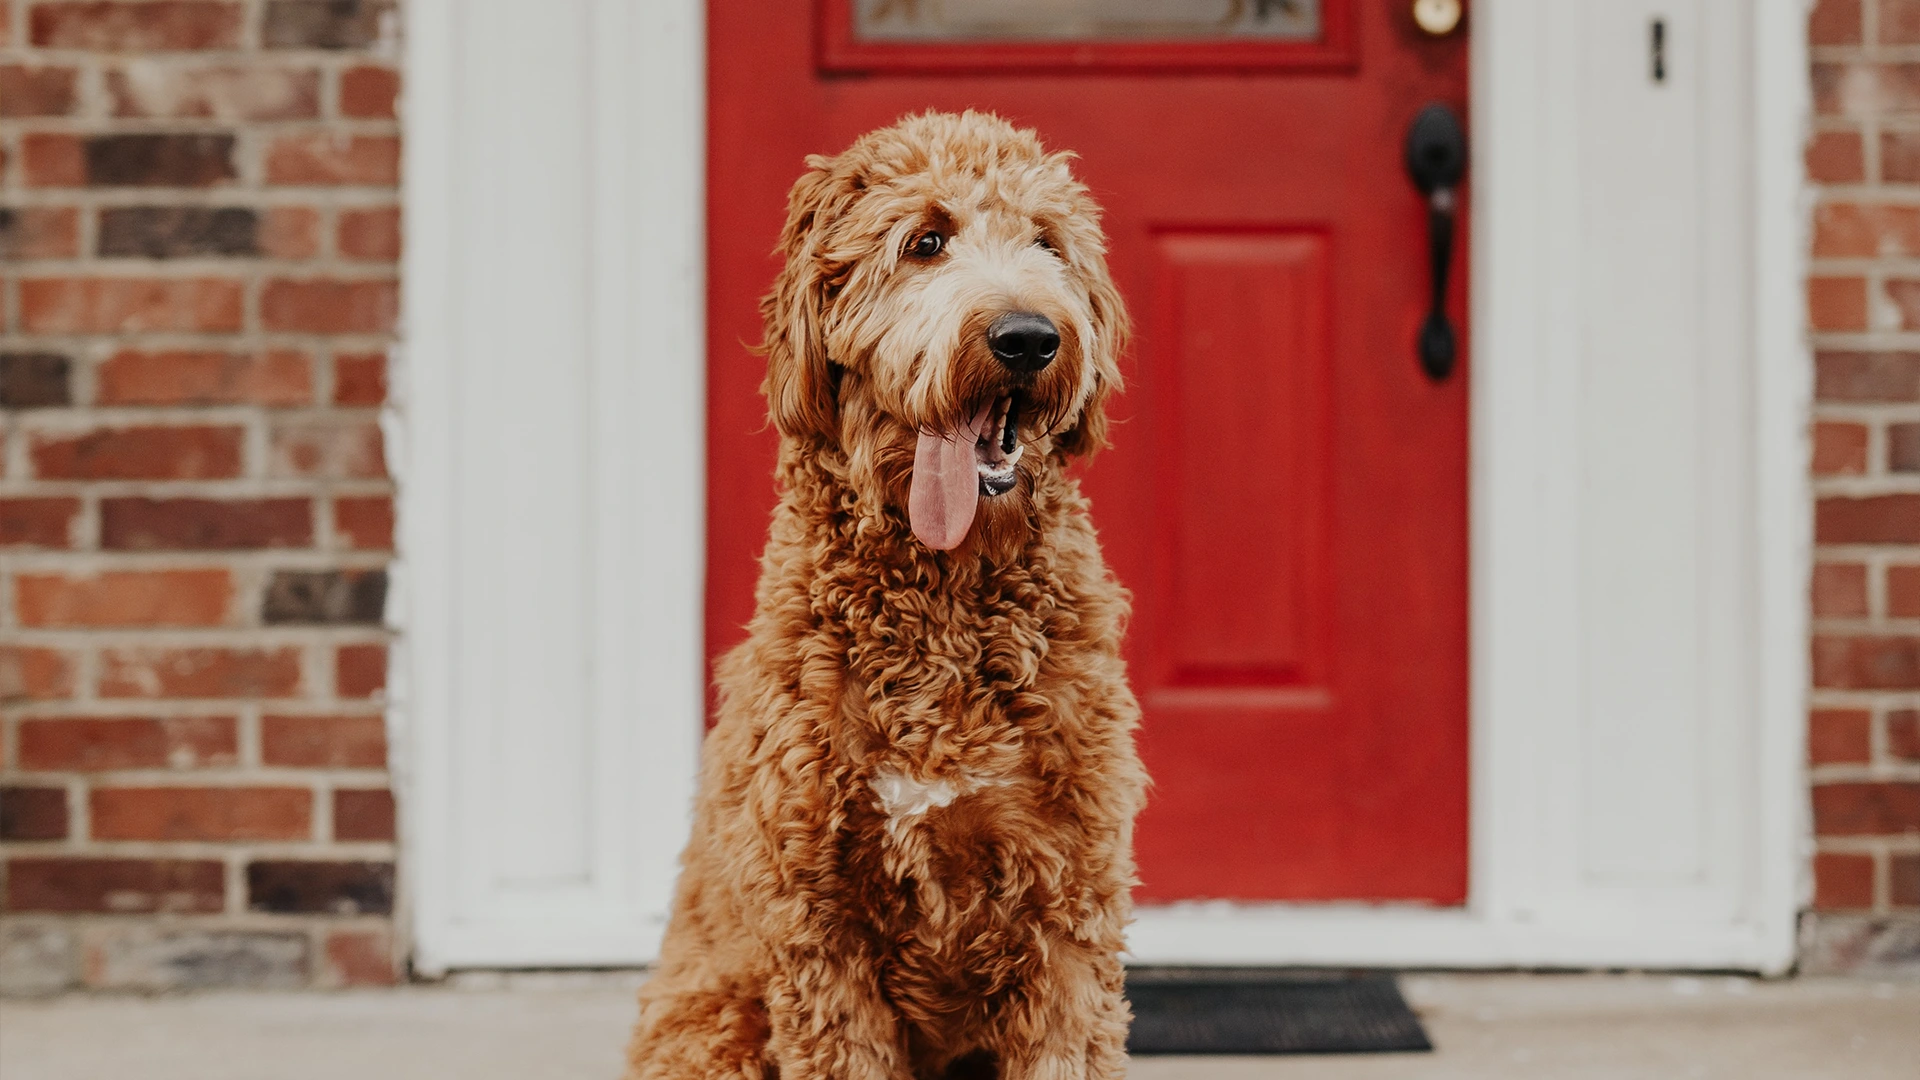 What are popular grooming styles for Goldendoodles in Oakland?